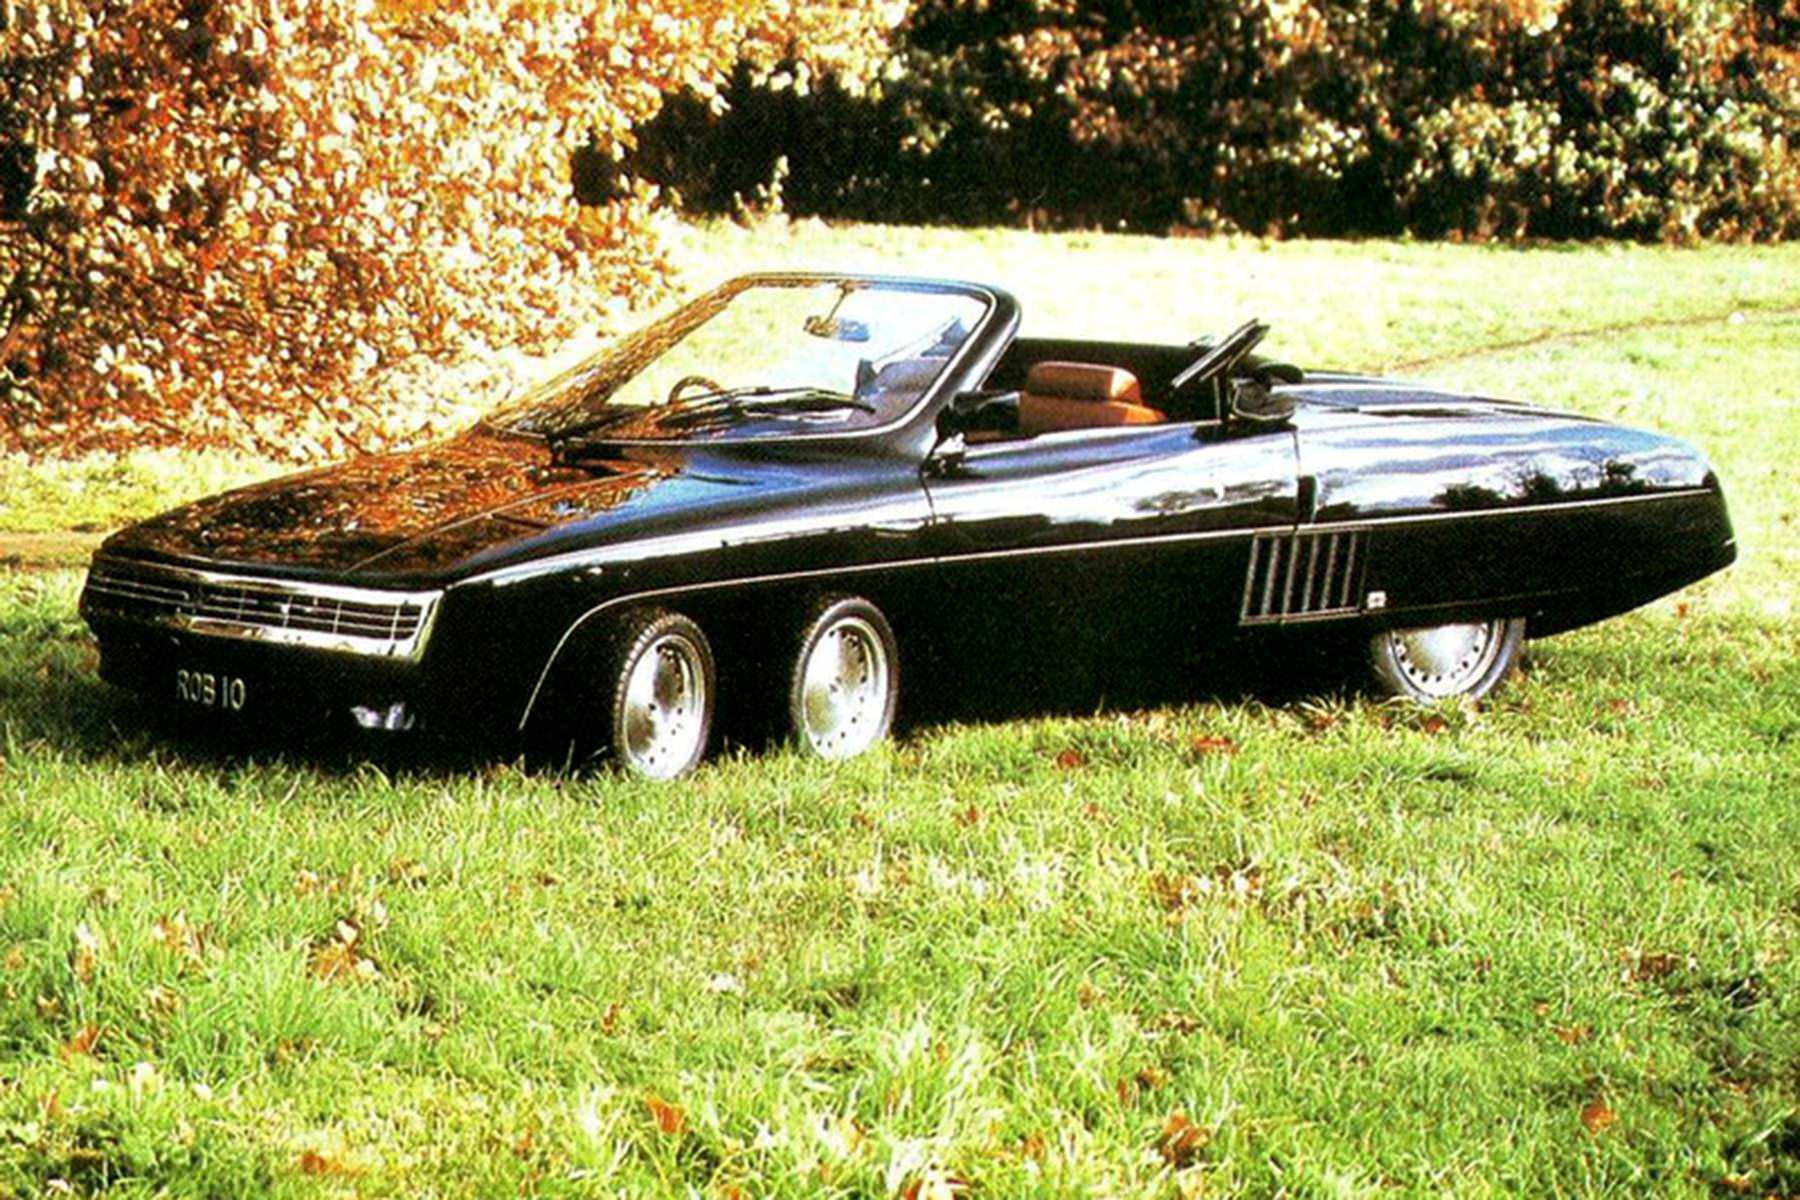 The Car Of The Future (From 1977) - The Six-Wheeled Panther 6